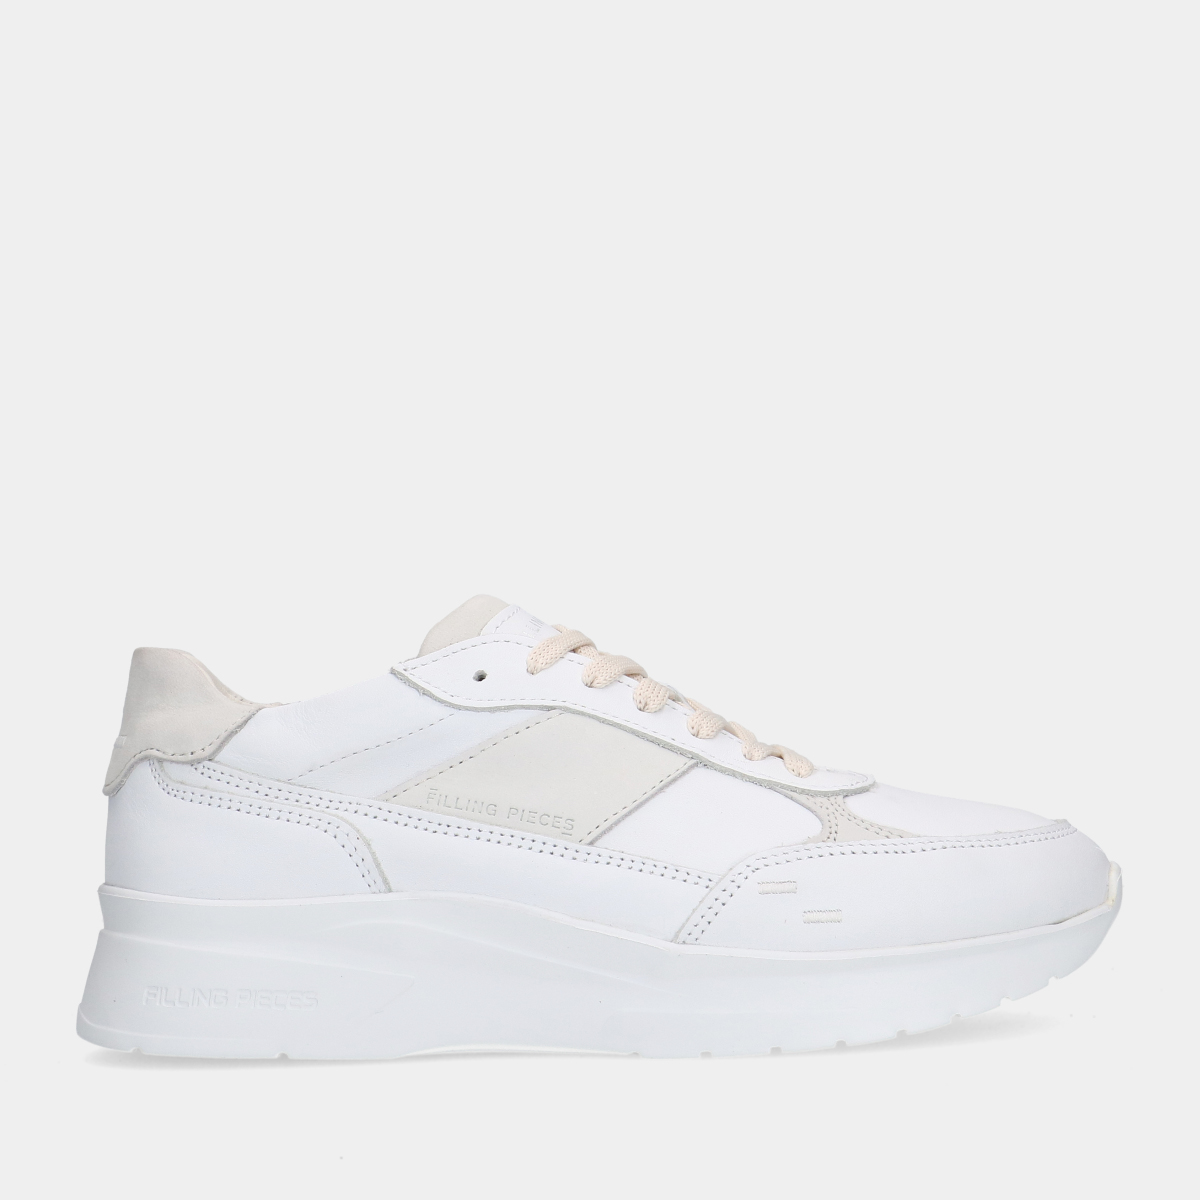 Filling Pieces Jet Runner White - Grey dames sneakers